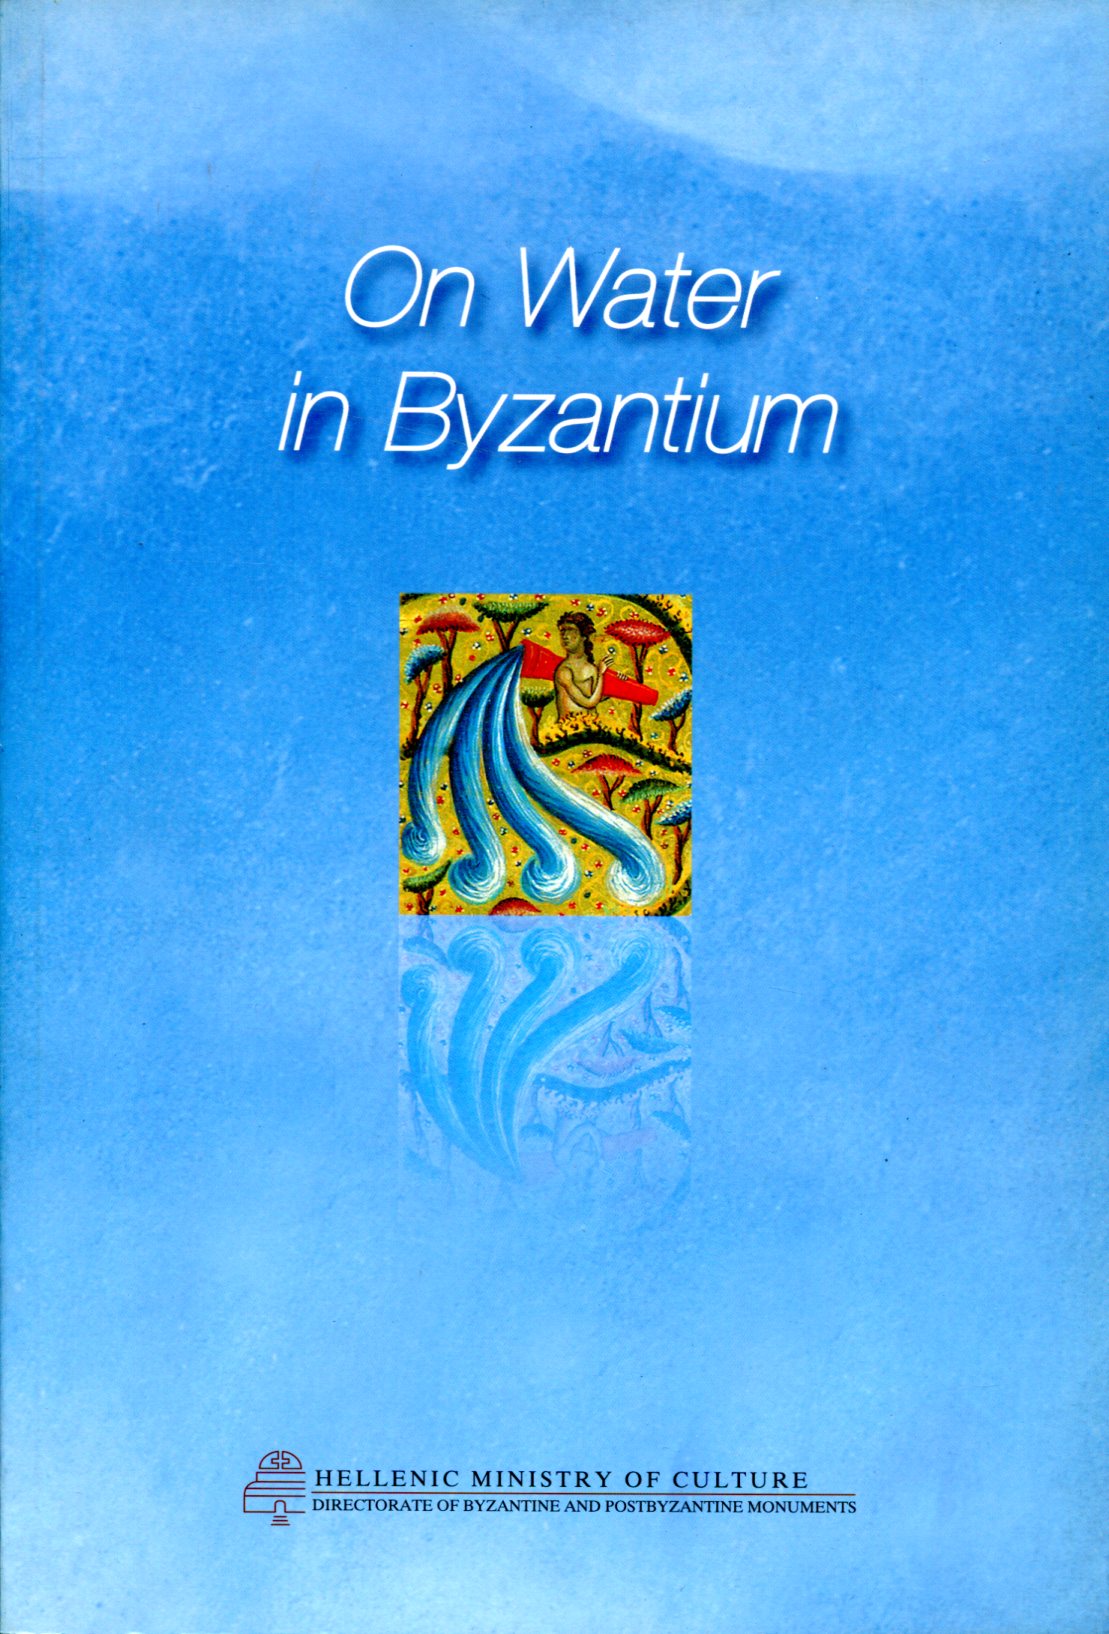 ON WATER IN BYZANTIUM